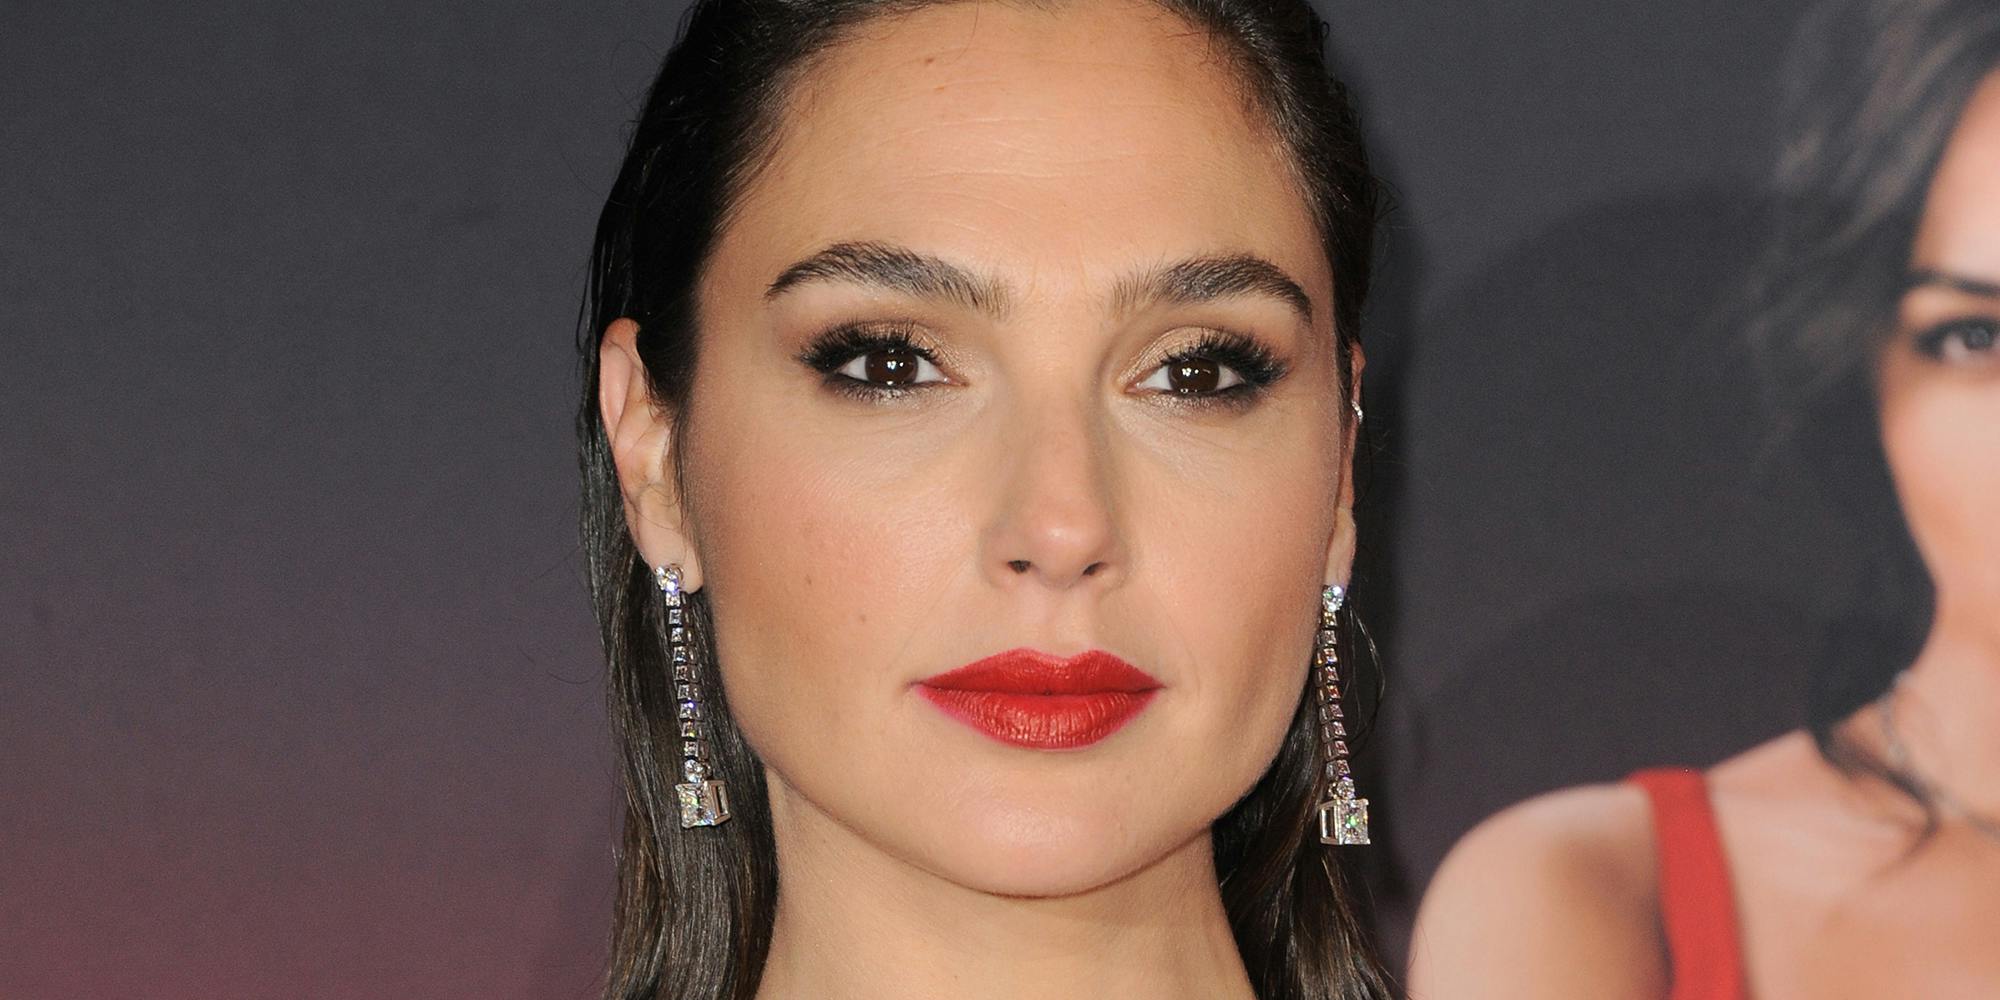 Gal Gadot at the World Premiere of Netflix's 'Red Notice' held at the L.A. LIVE in Los Angeles, USA on November 3, 2021.